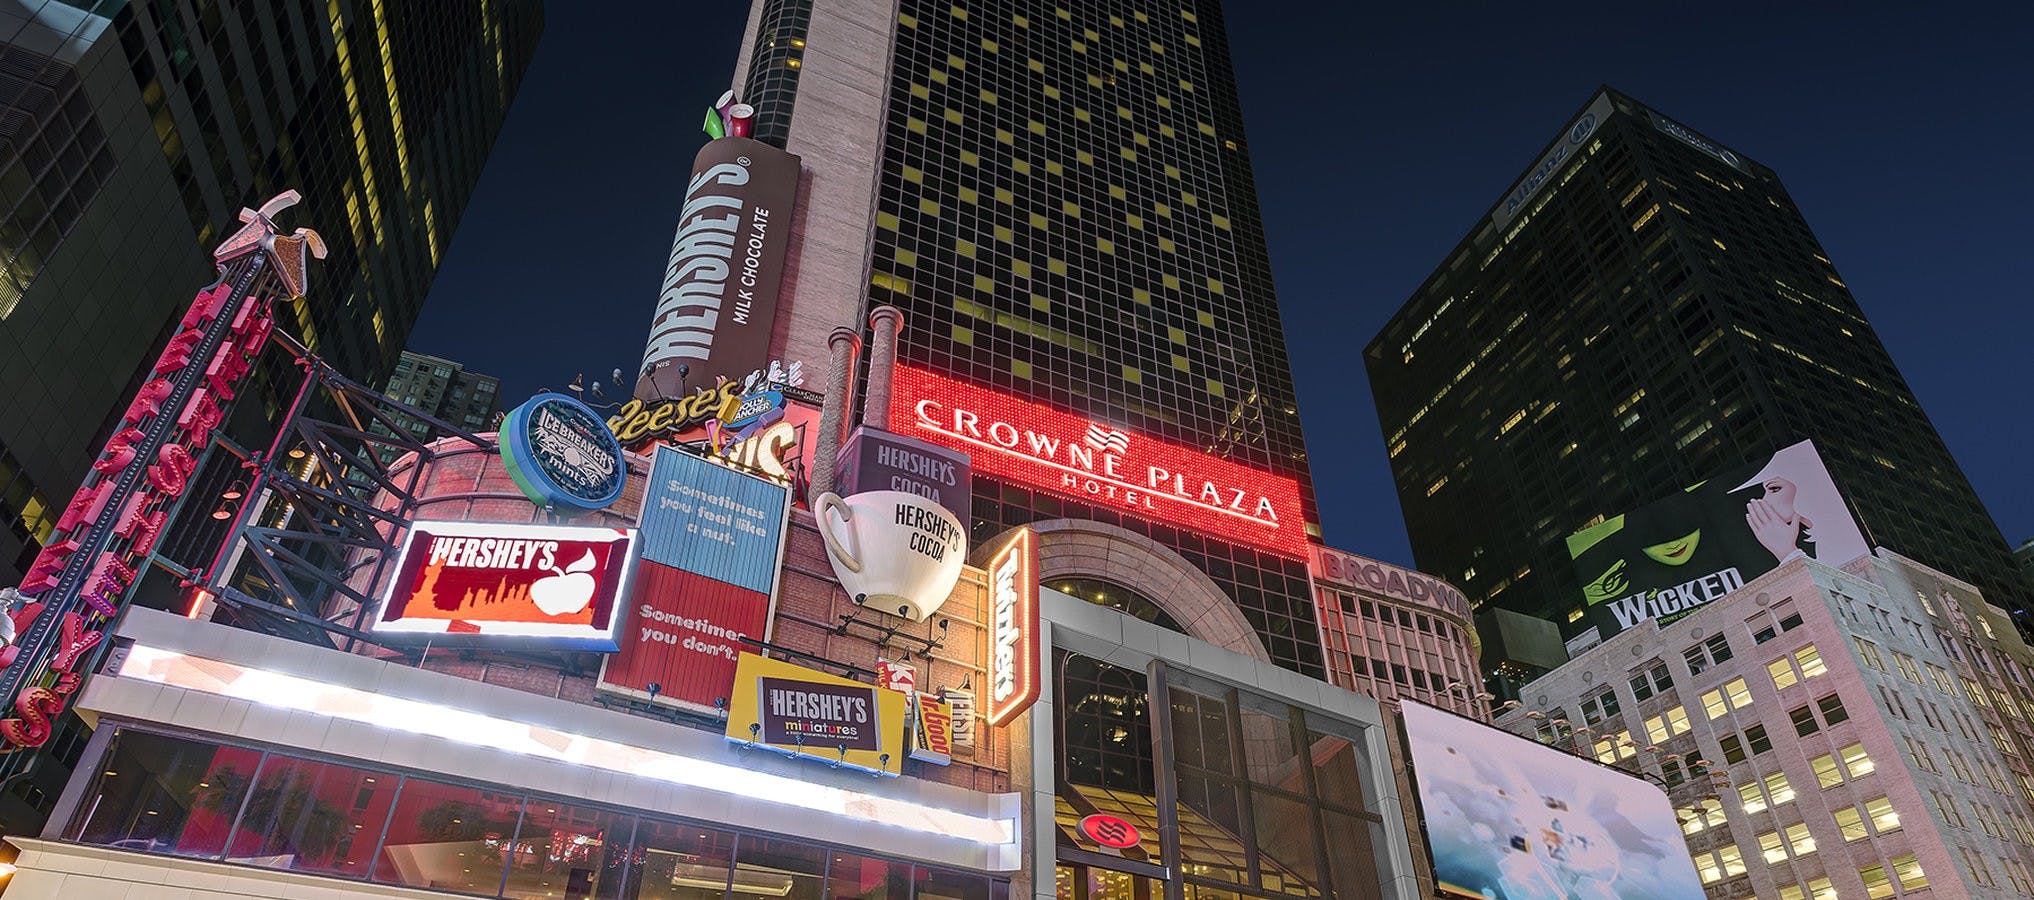 Crowne Plaza Hotel Times Square Cropped - crowne-plaza-hotel-times-square-cropped